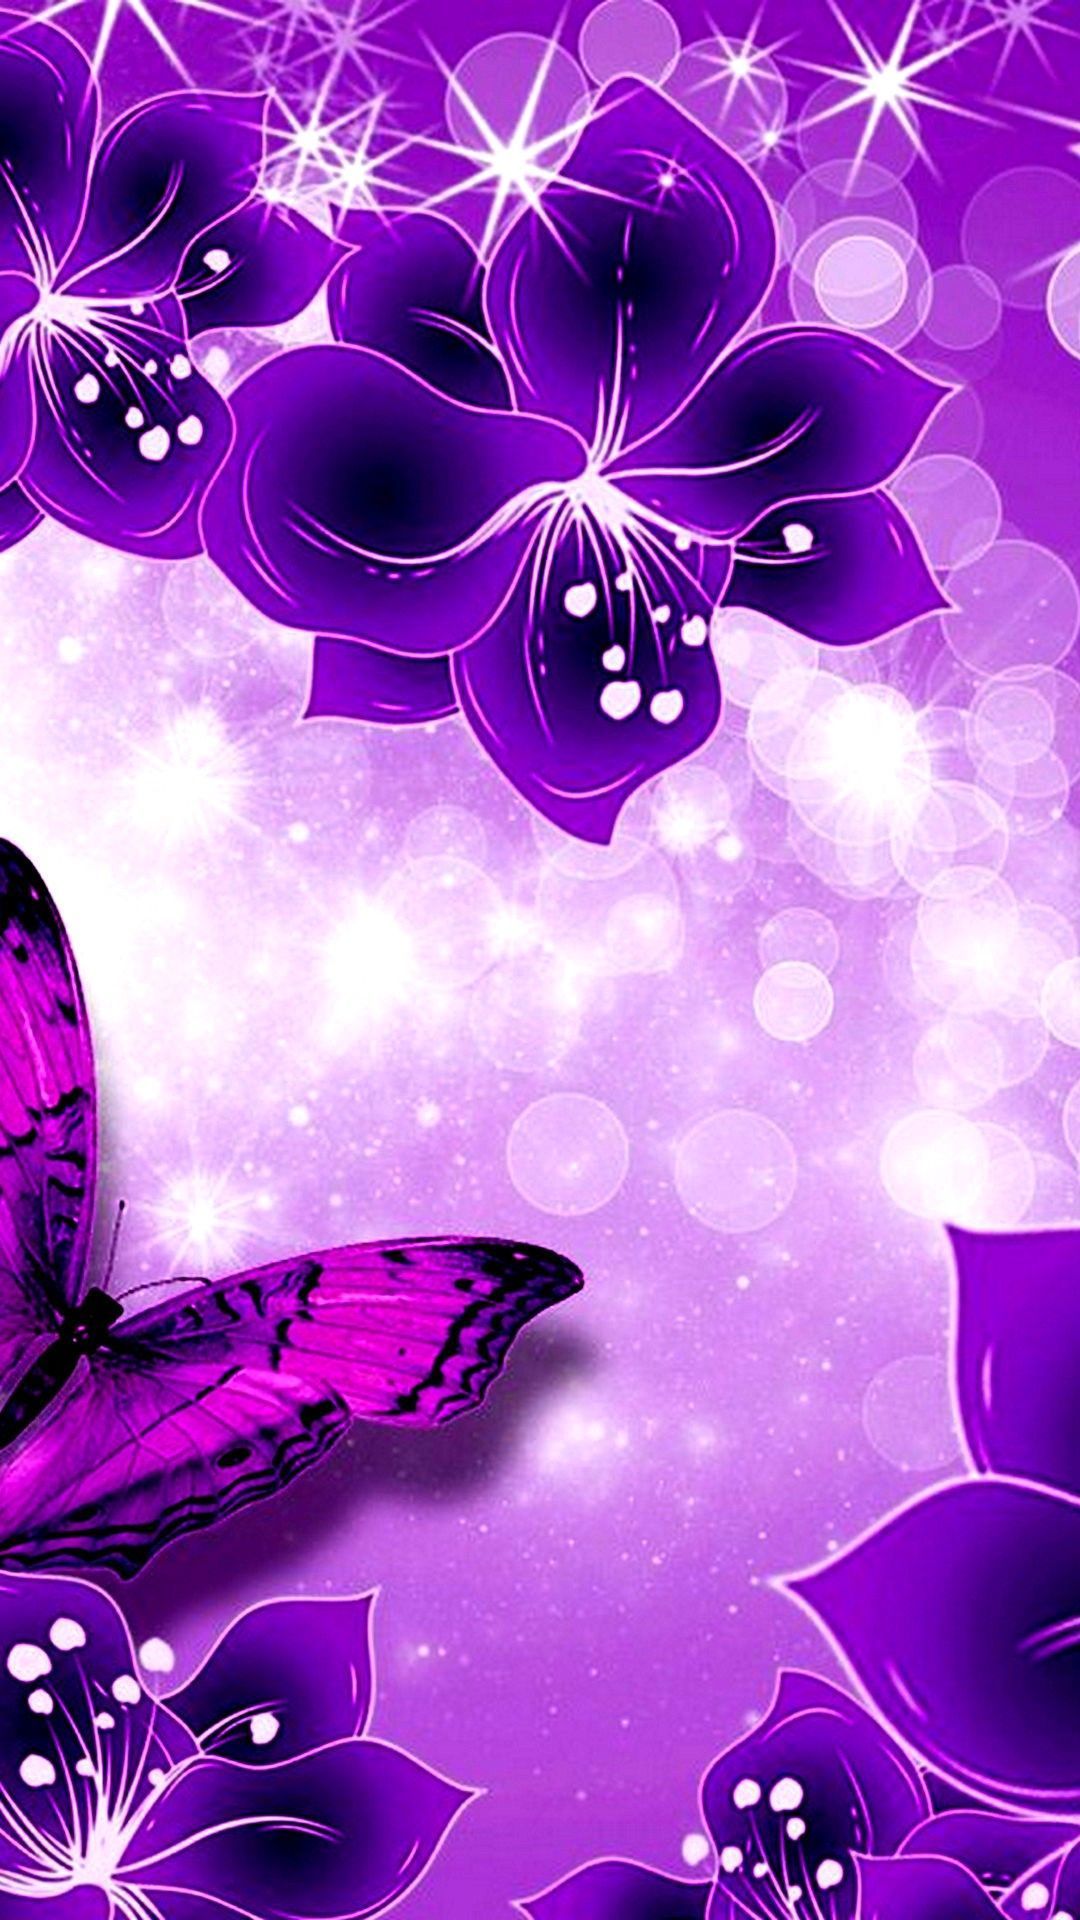 A beautiful purple aesthetic wallpaper with a butterfly and flowers, perfect for your iPhone 7 wallpaper. - Cute purple